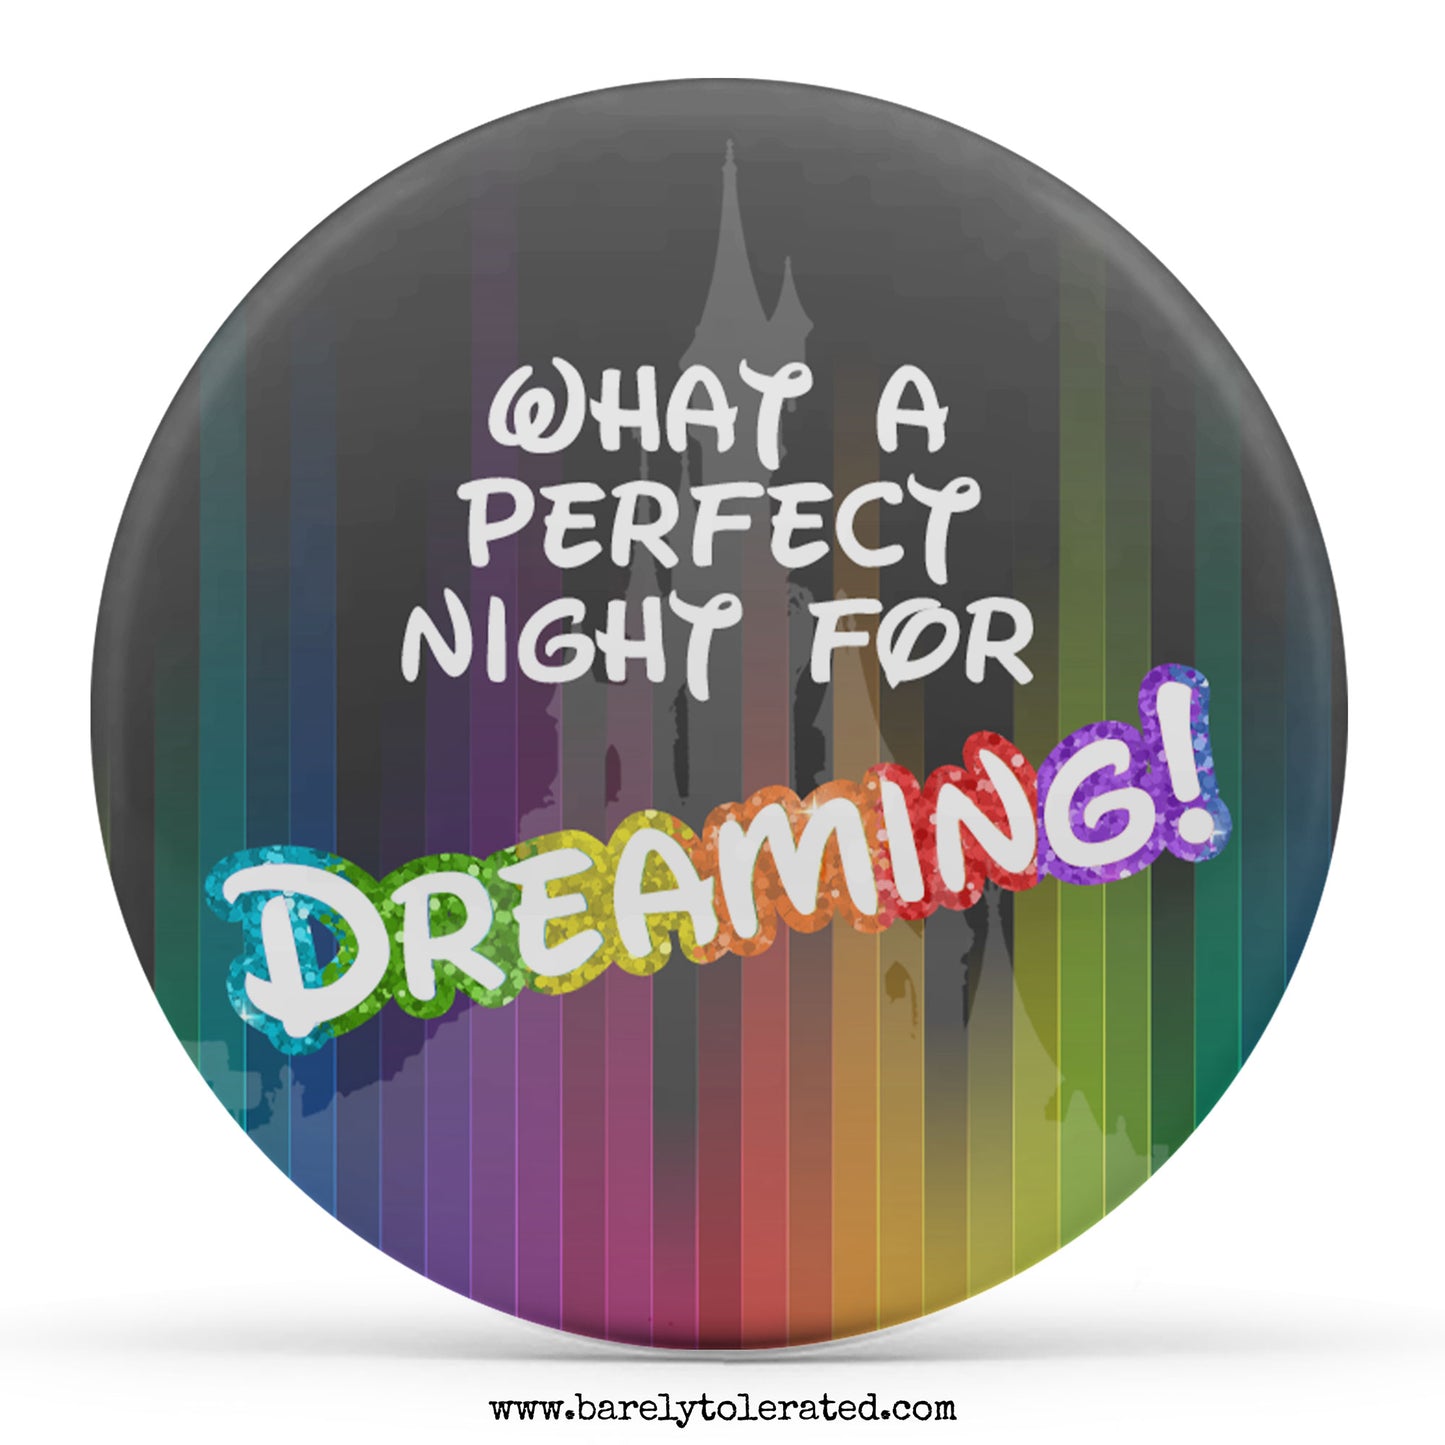 What A Perfect Night For Dreaming!